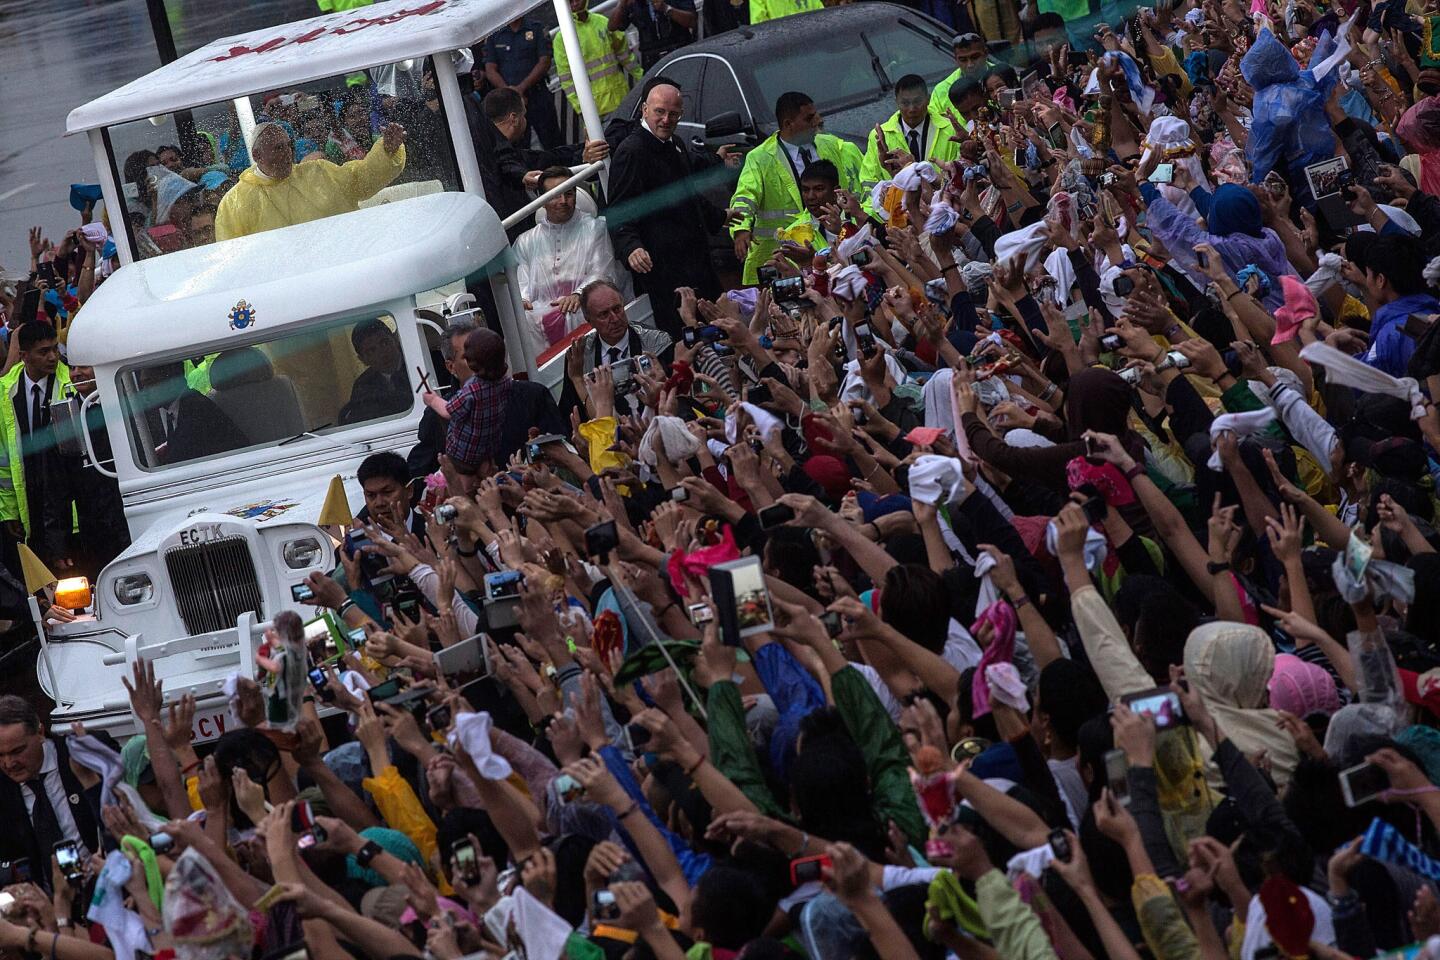 Pope Francis waves to the crowd after celebrating Mass at Manila's Rizal Park.